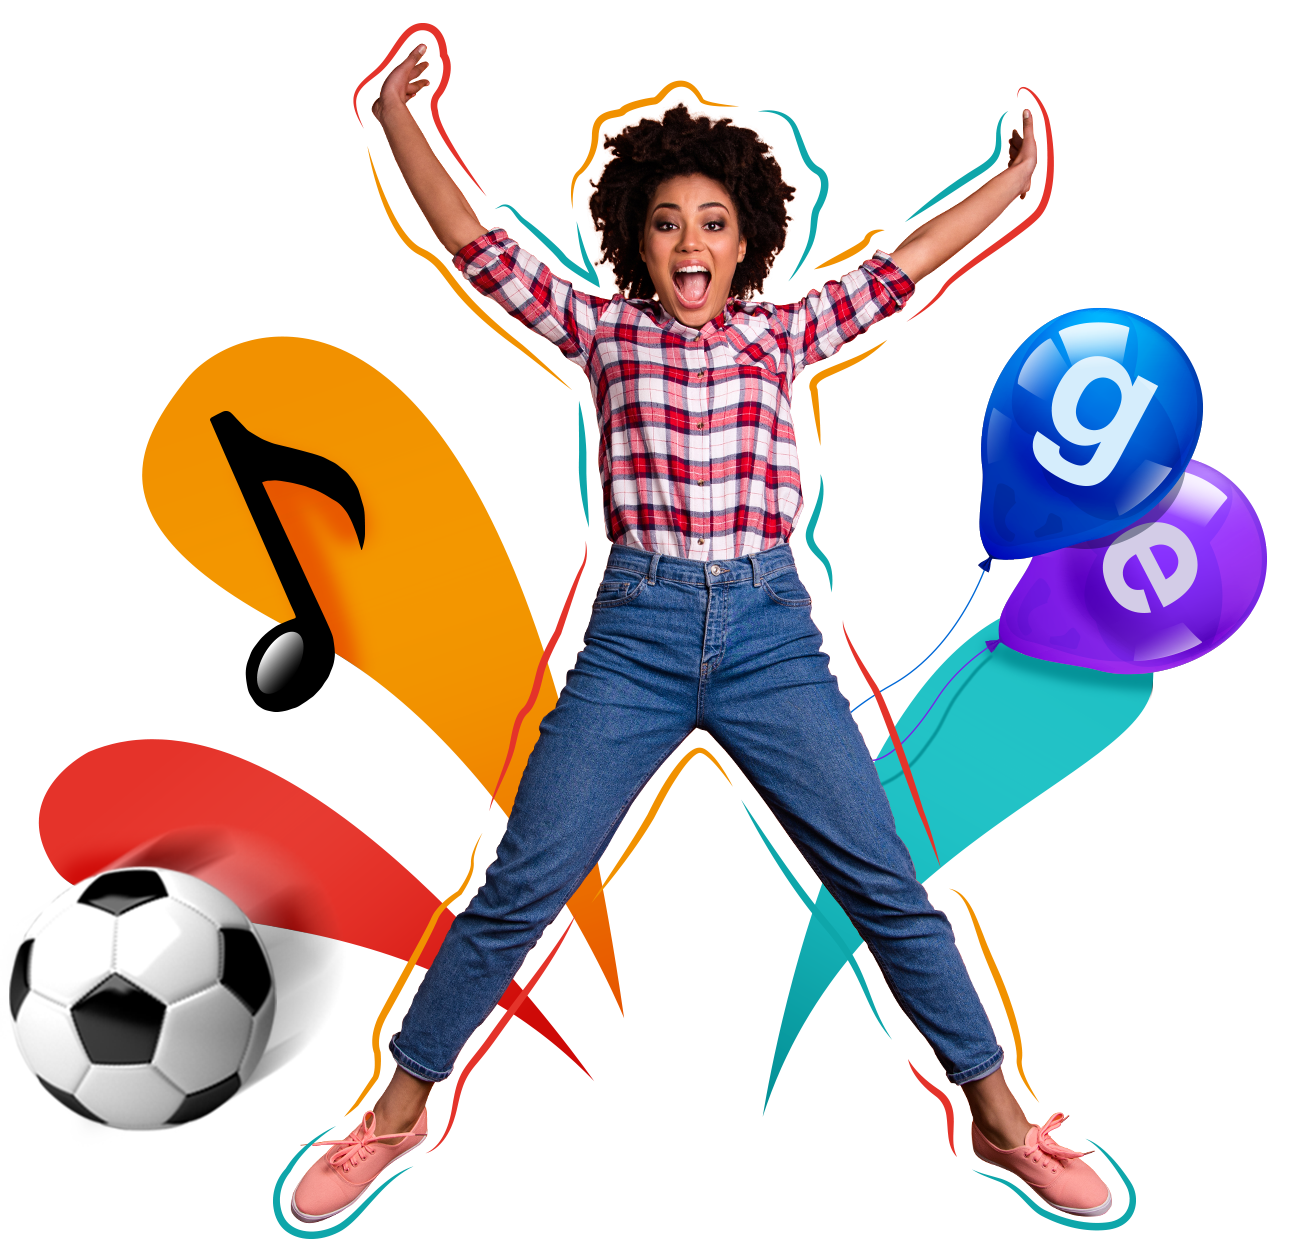 woman in checkered shirt jumping surrounded by a football, balloons and music note